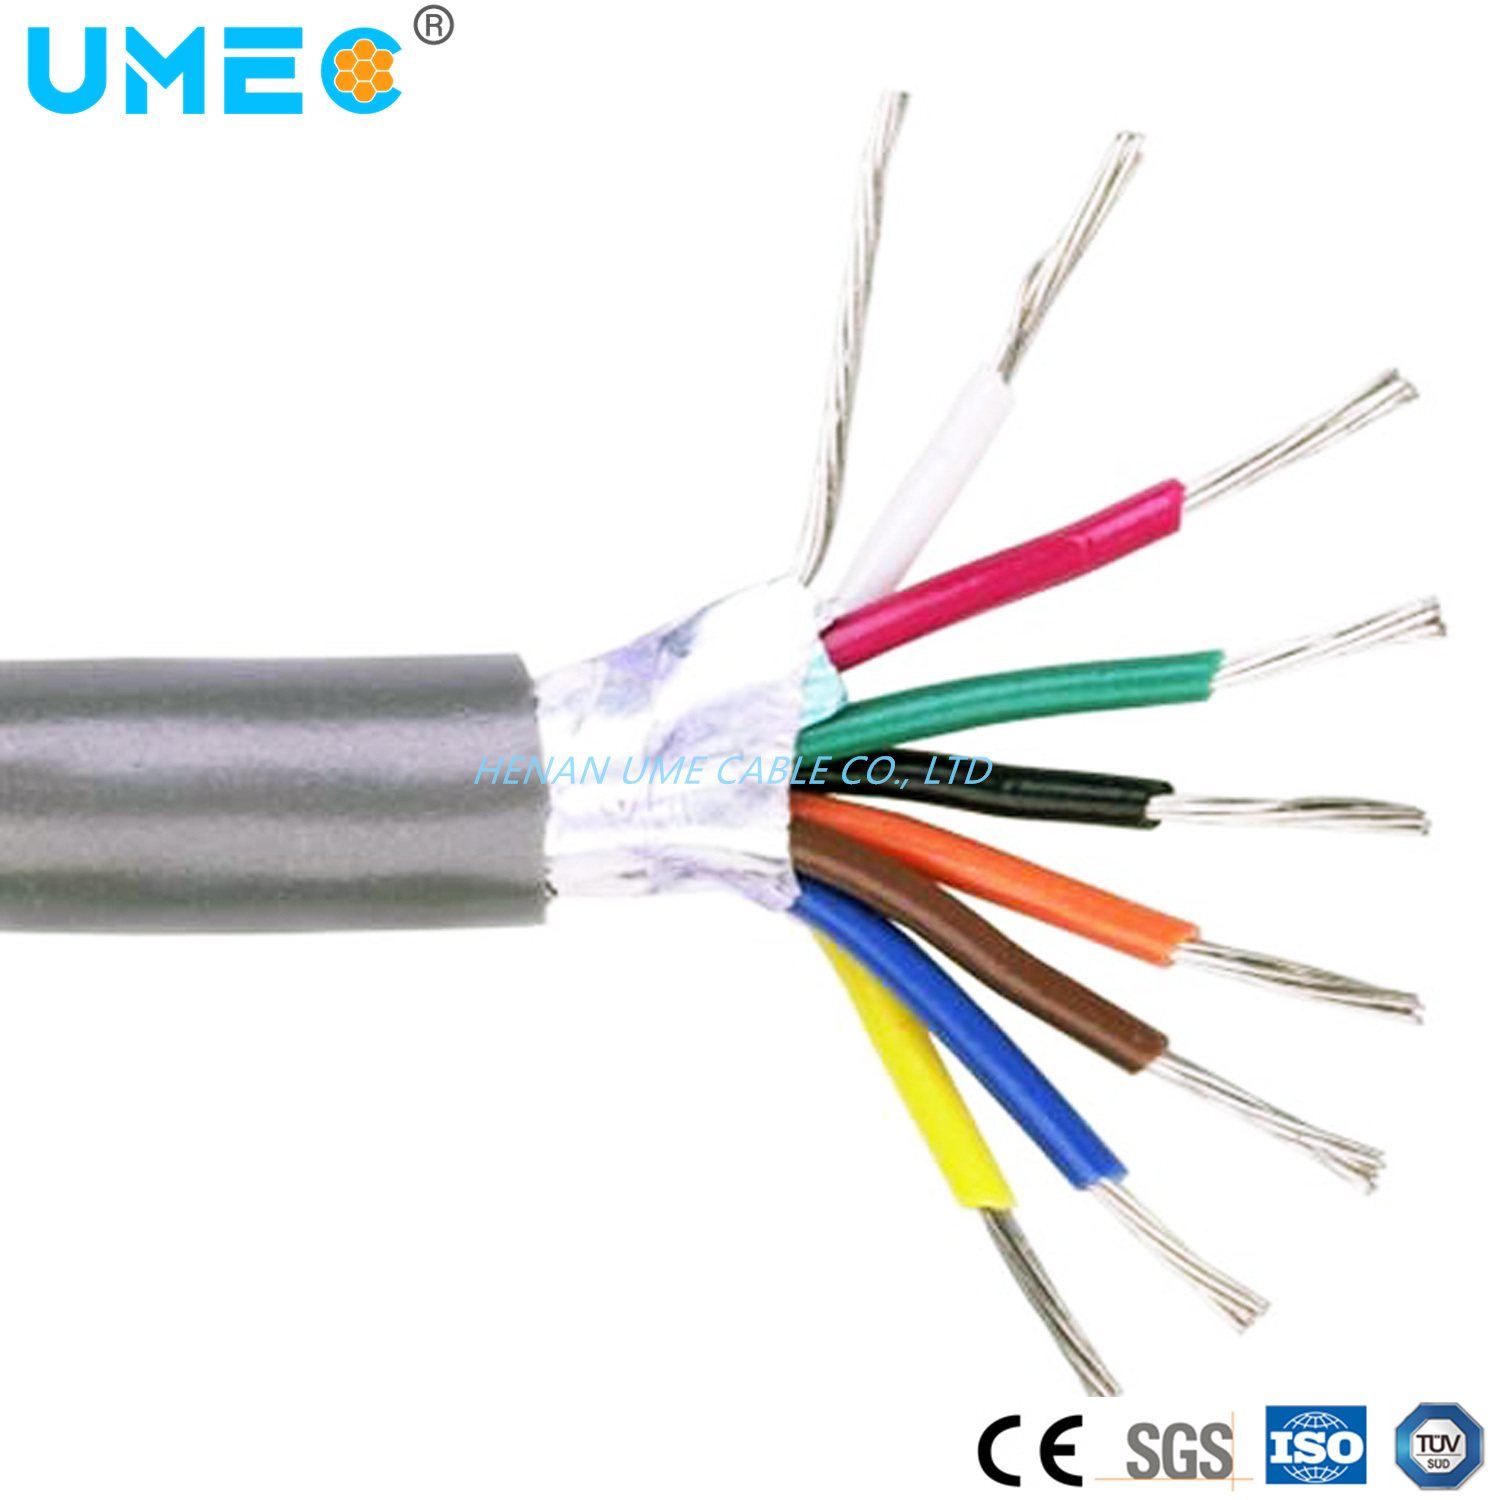 Heavy Type Rubber Sheath Soft Cable